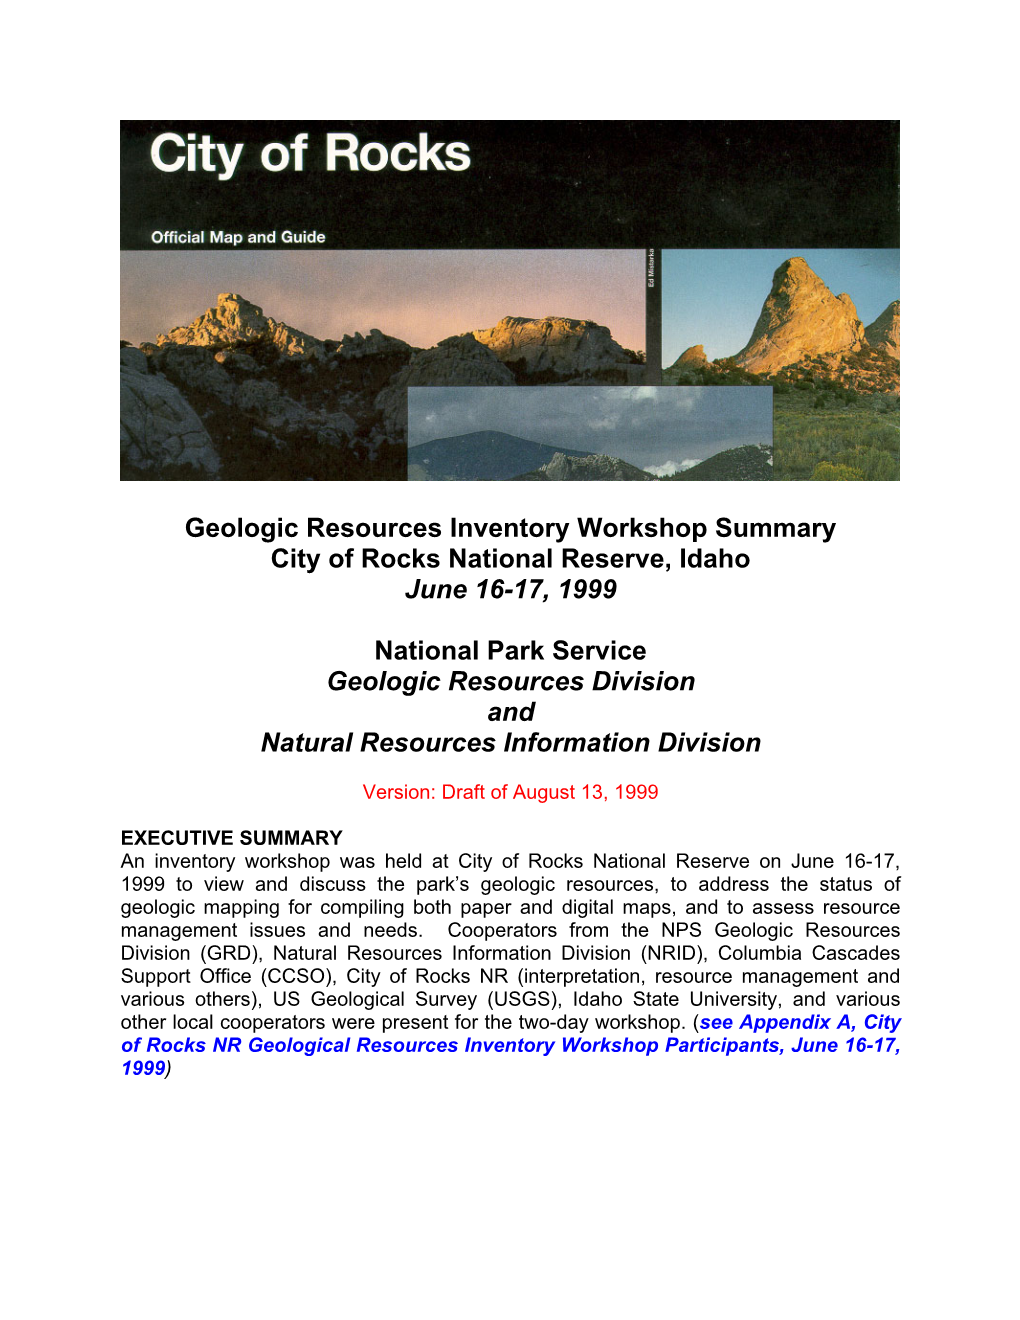 City of Rocks National Reserve Geologic Resources Inventory